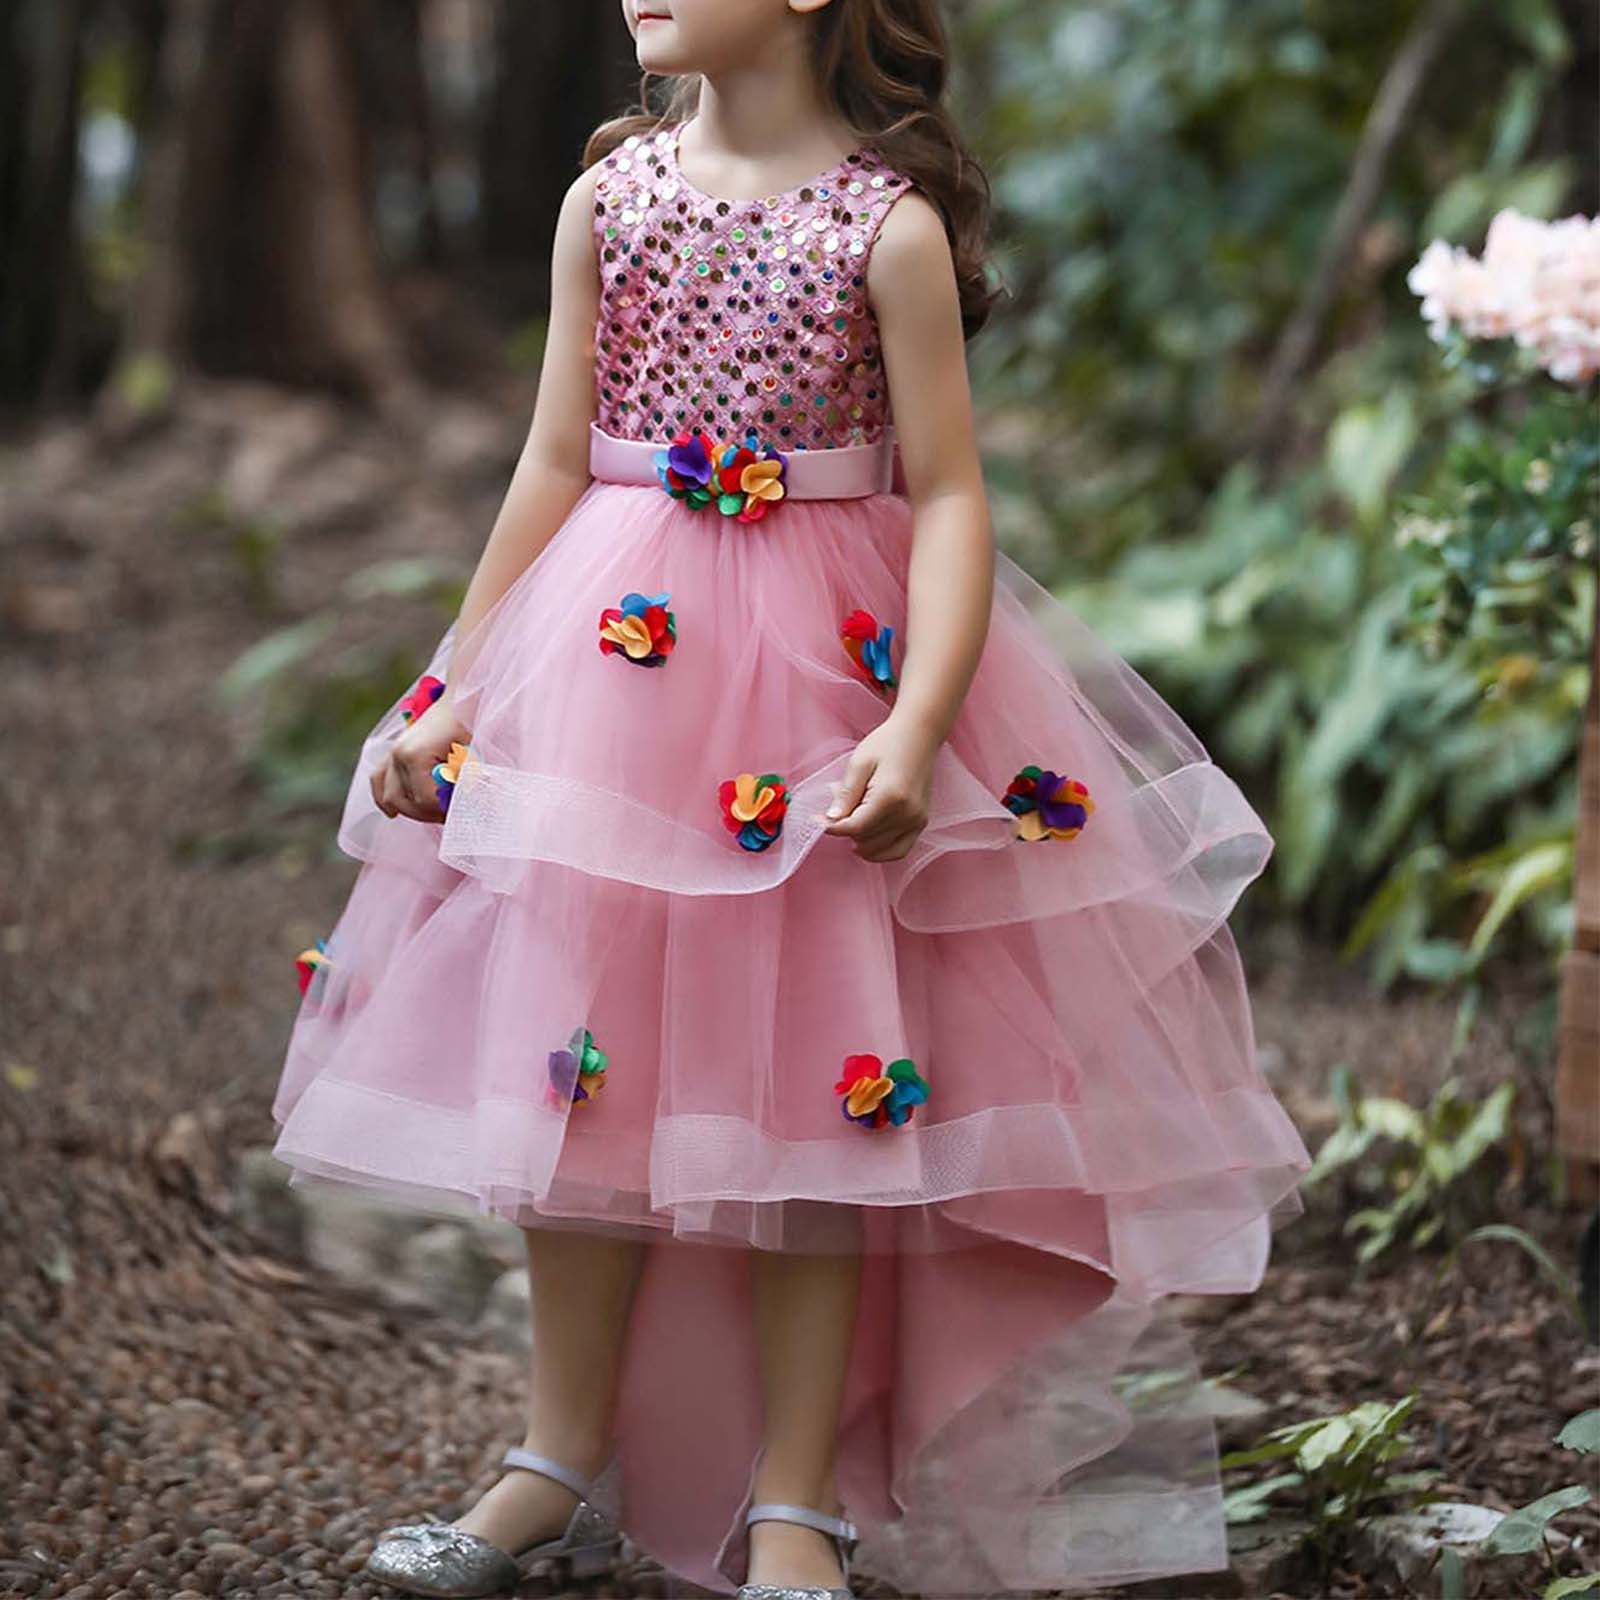 Girls Fashion Childrens From 2 To 11 Years Old Evening Ball Dresses Wedding  Princess Dress For Graduation Party Offic Wufbw H9Trk From Bbgargden, $73.8  | DHgate.Com